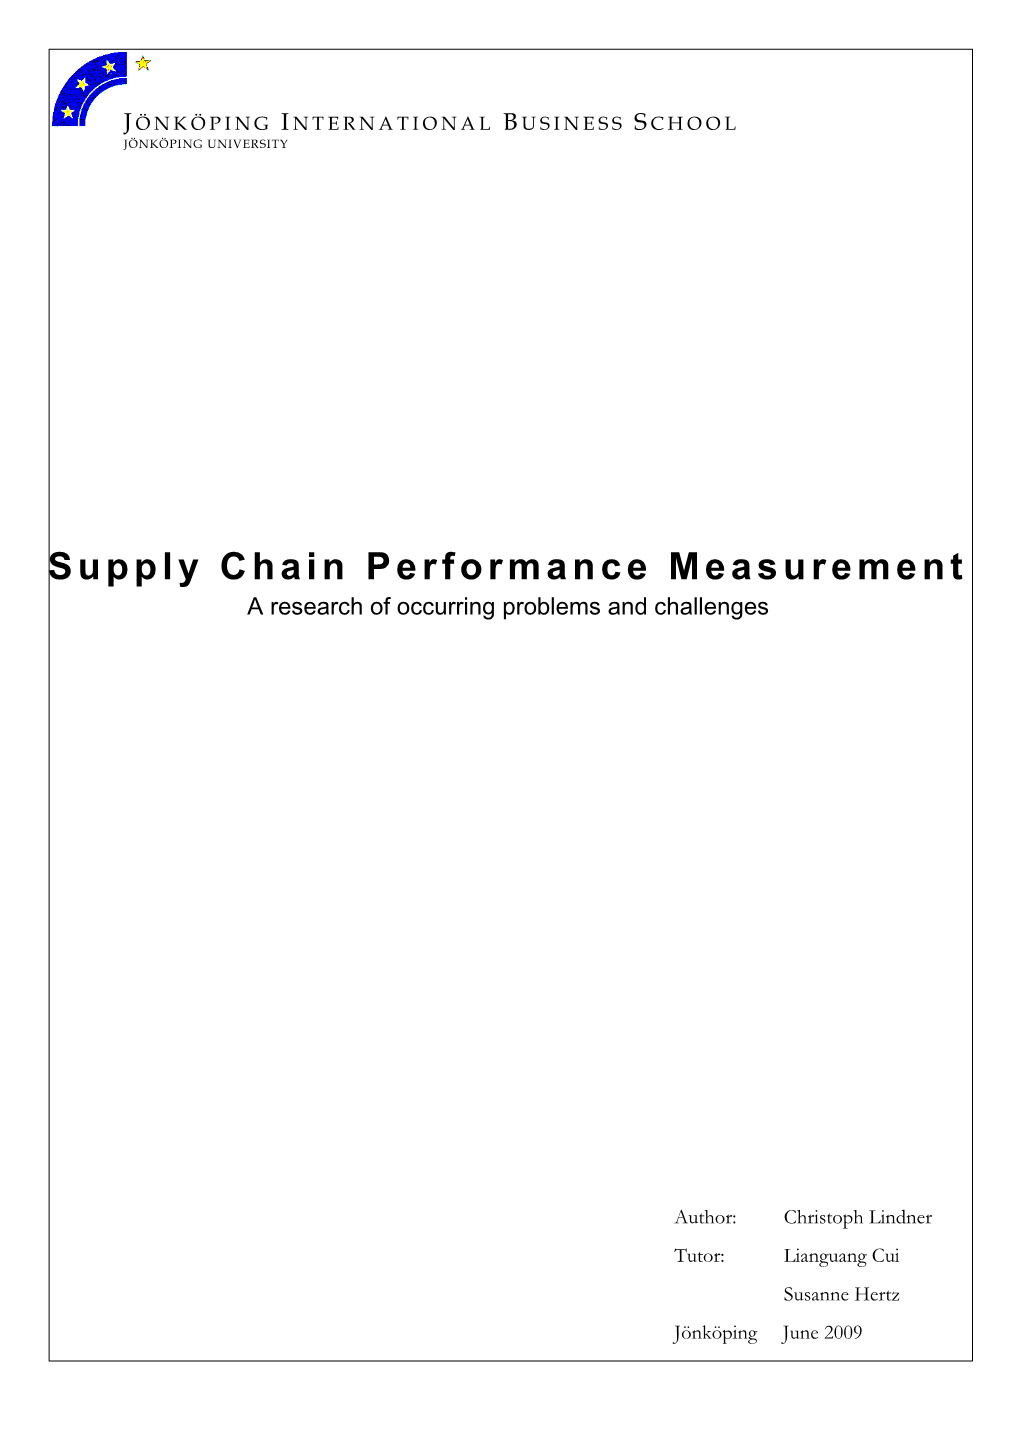 thesis performance measurement supply chain